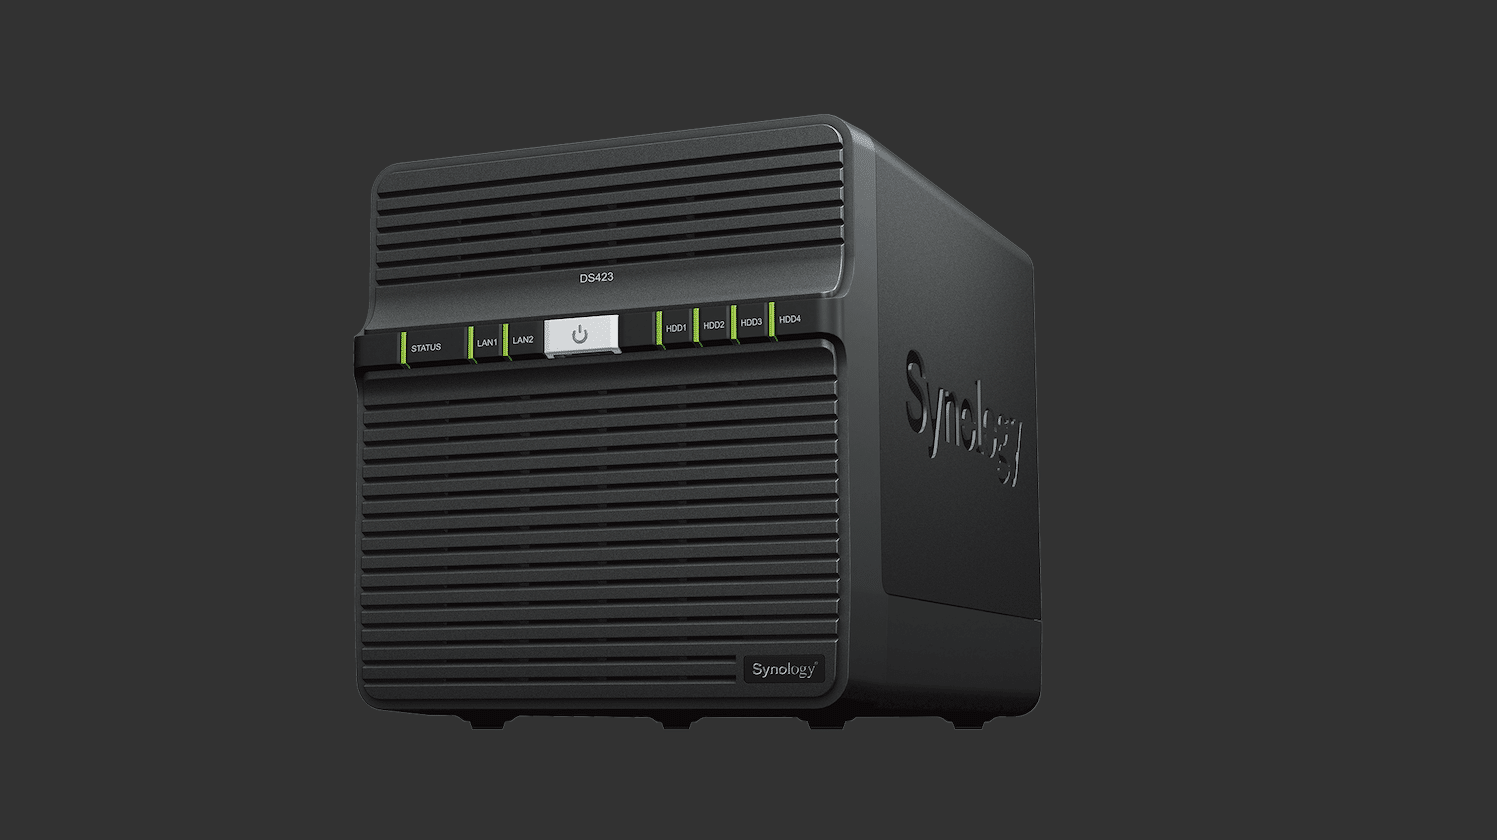 Synology DiskStation DS423: New storage solution available